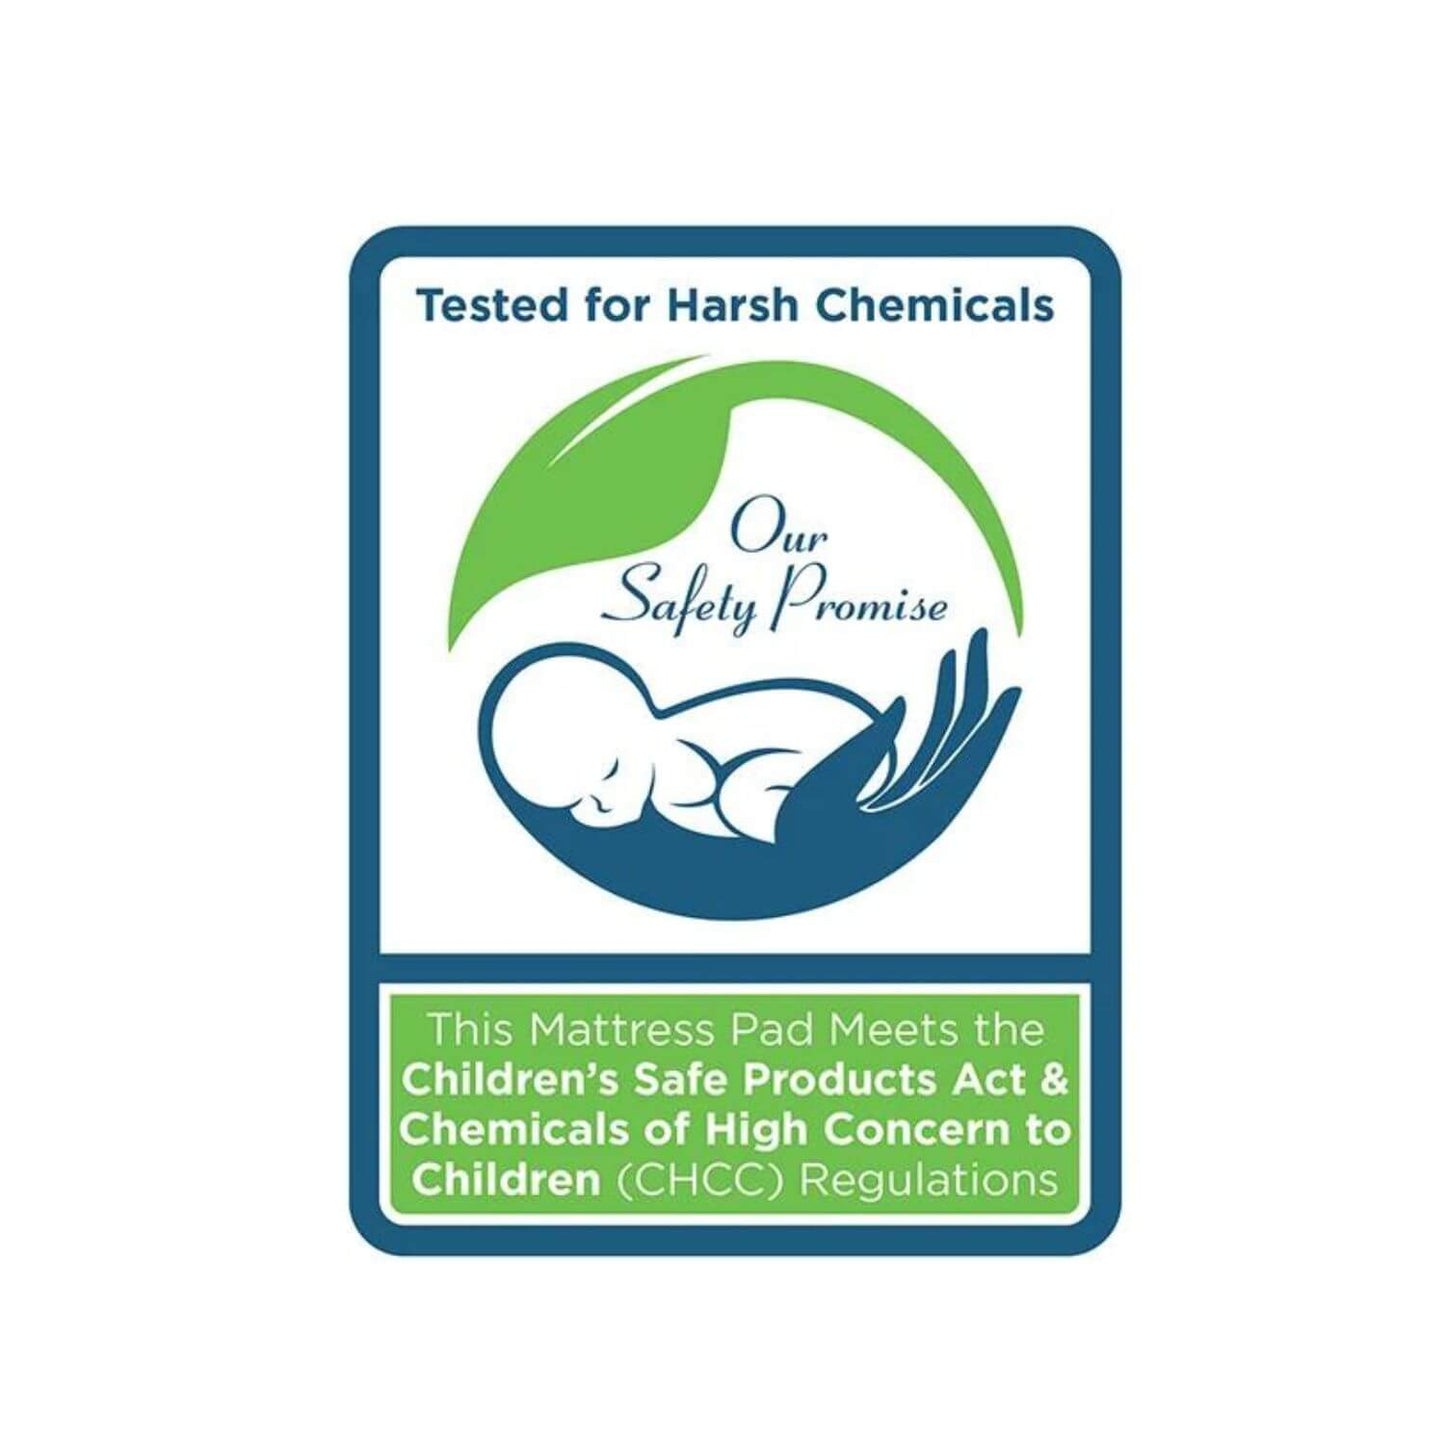 Tested for Harsh Chemicals